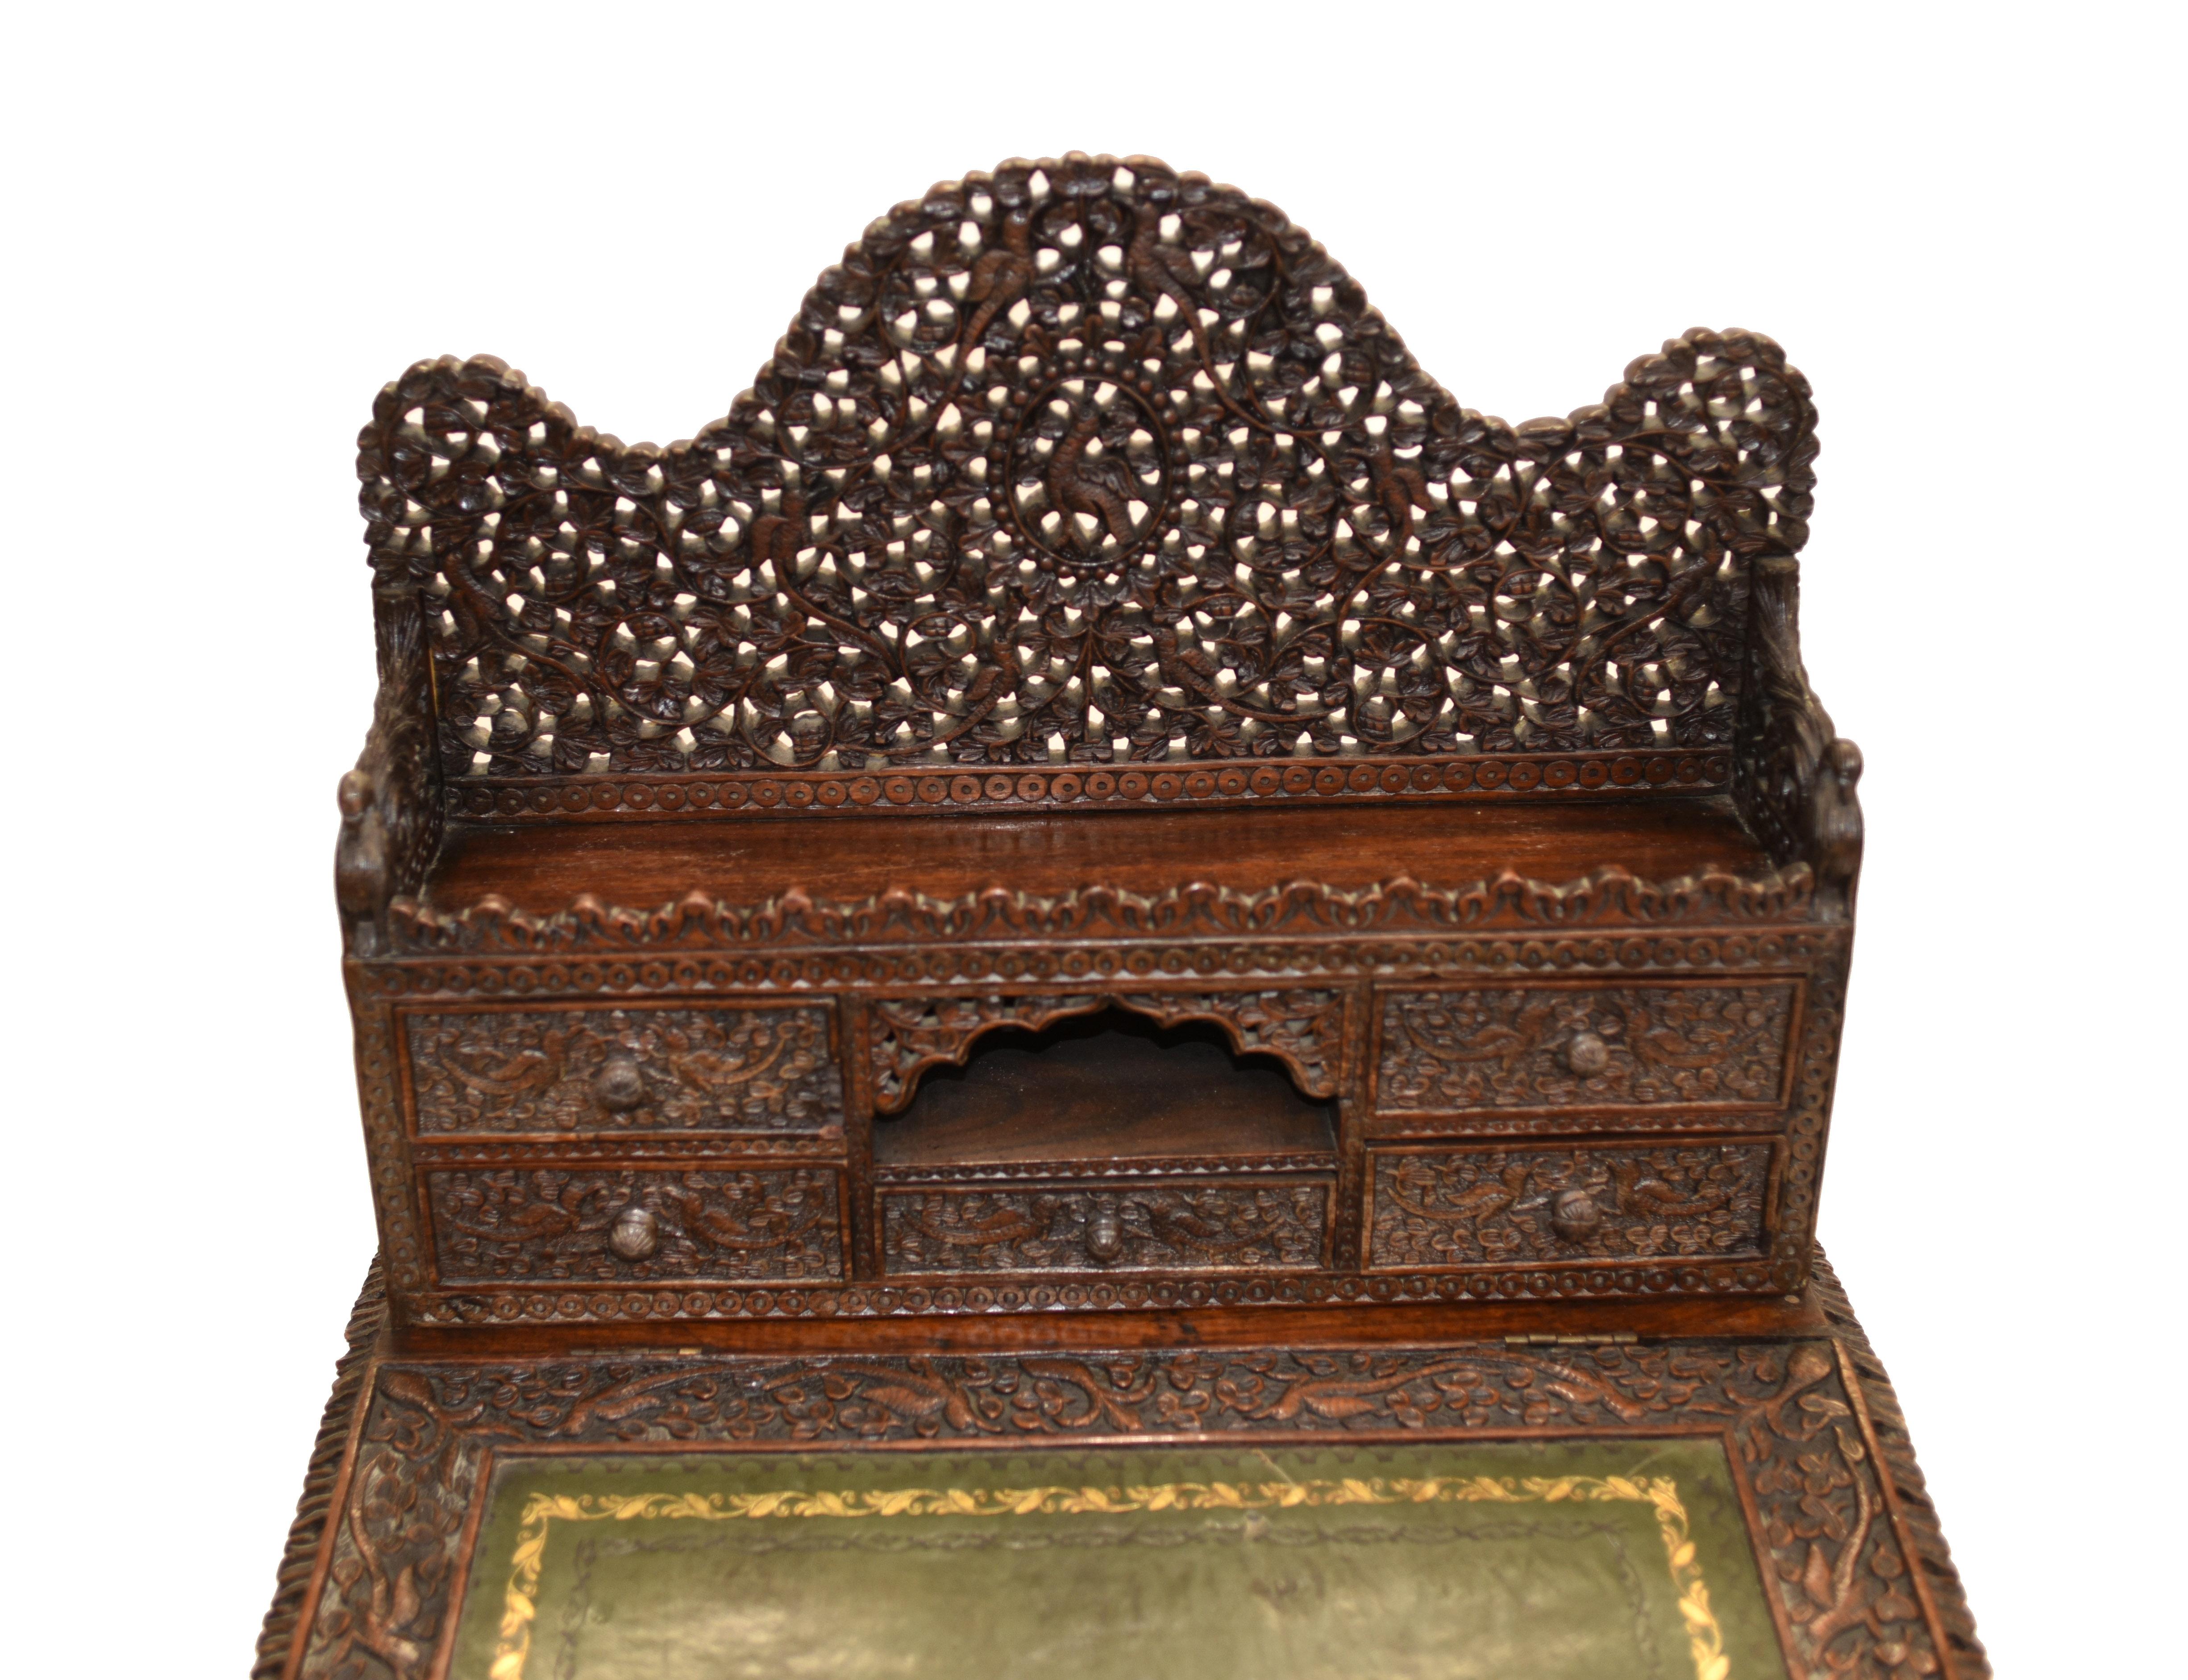 - You are viewing an exquisite antique Burmese Davenport desk
- We date this exceptional piece to circa 1885 and it really is a showstopper
- Burmese furniture is characterised by intricate carvings and this desk has it in abundance
- Love